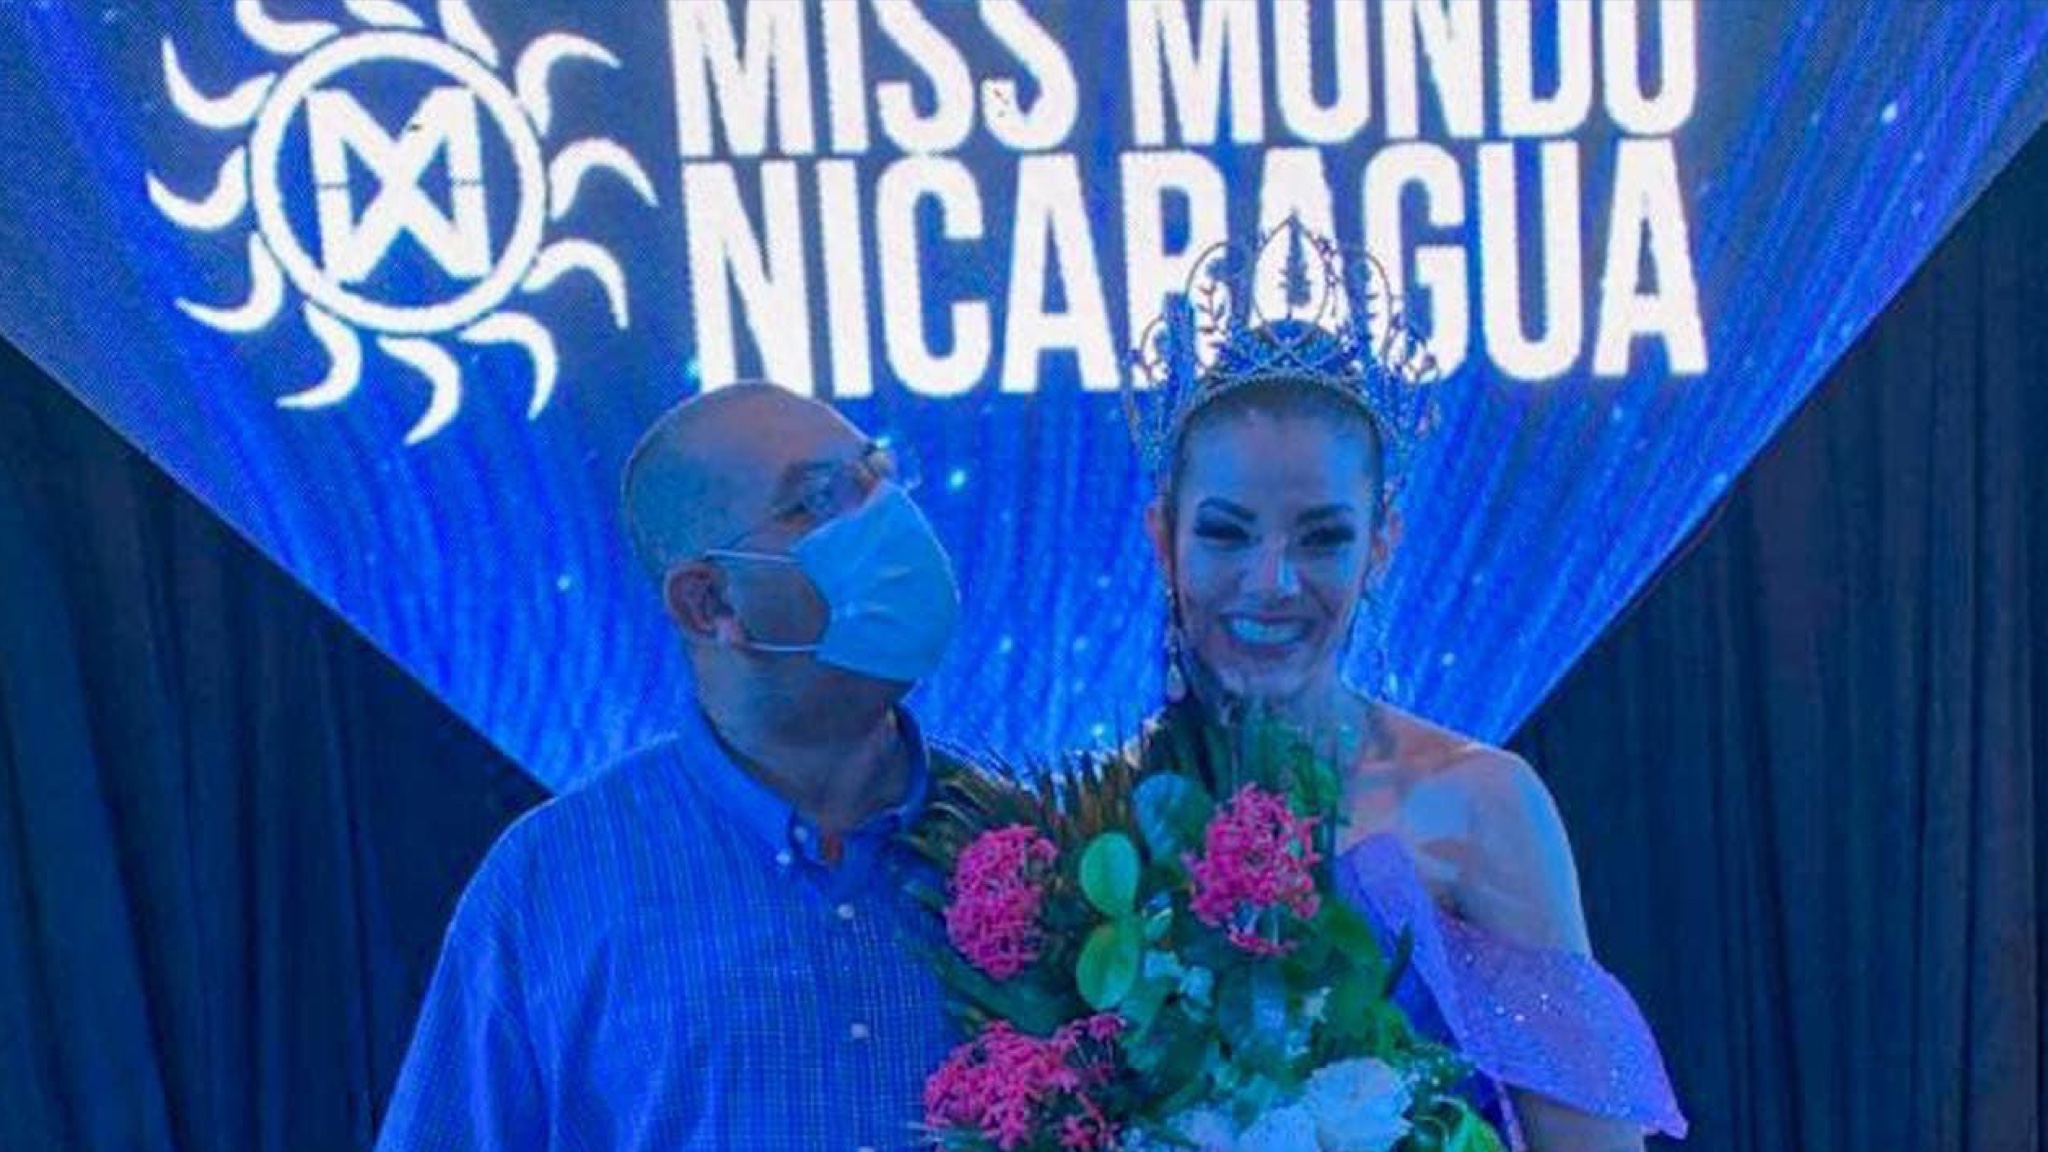 Miss World Nicaragua remembers with "nostalgia" the support of her father, now a political prisoner